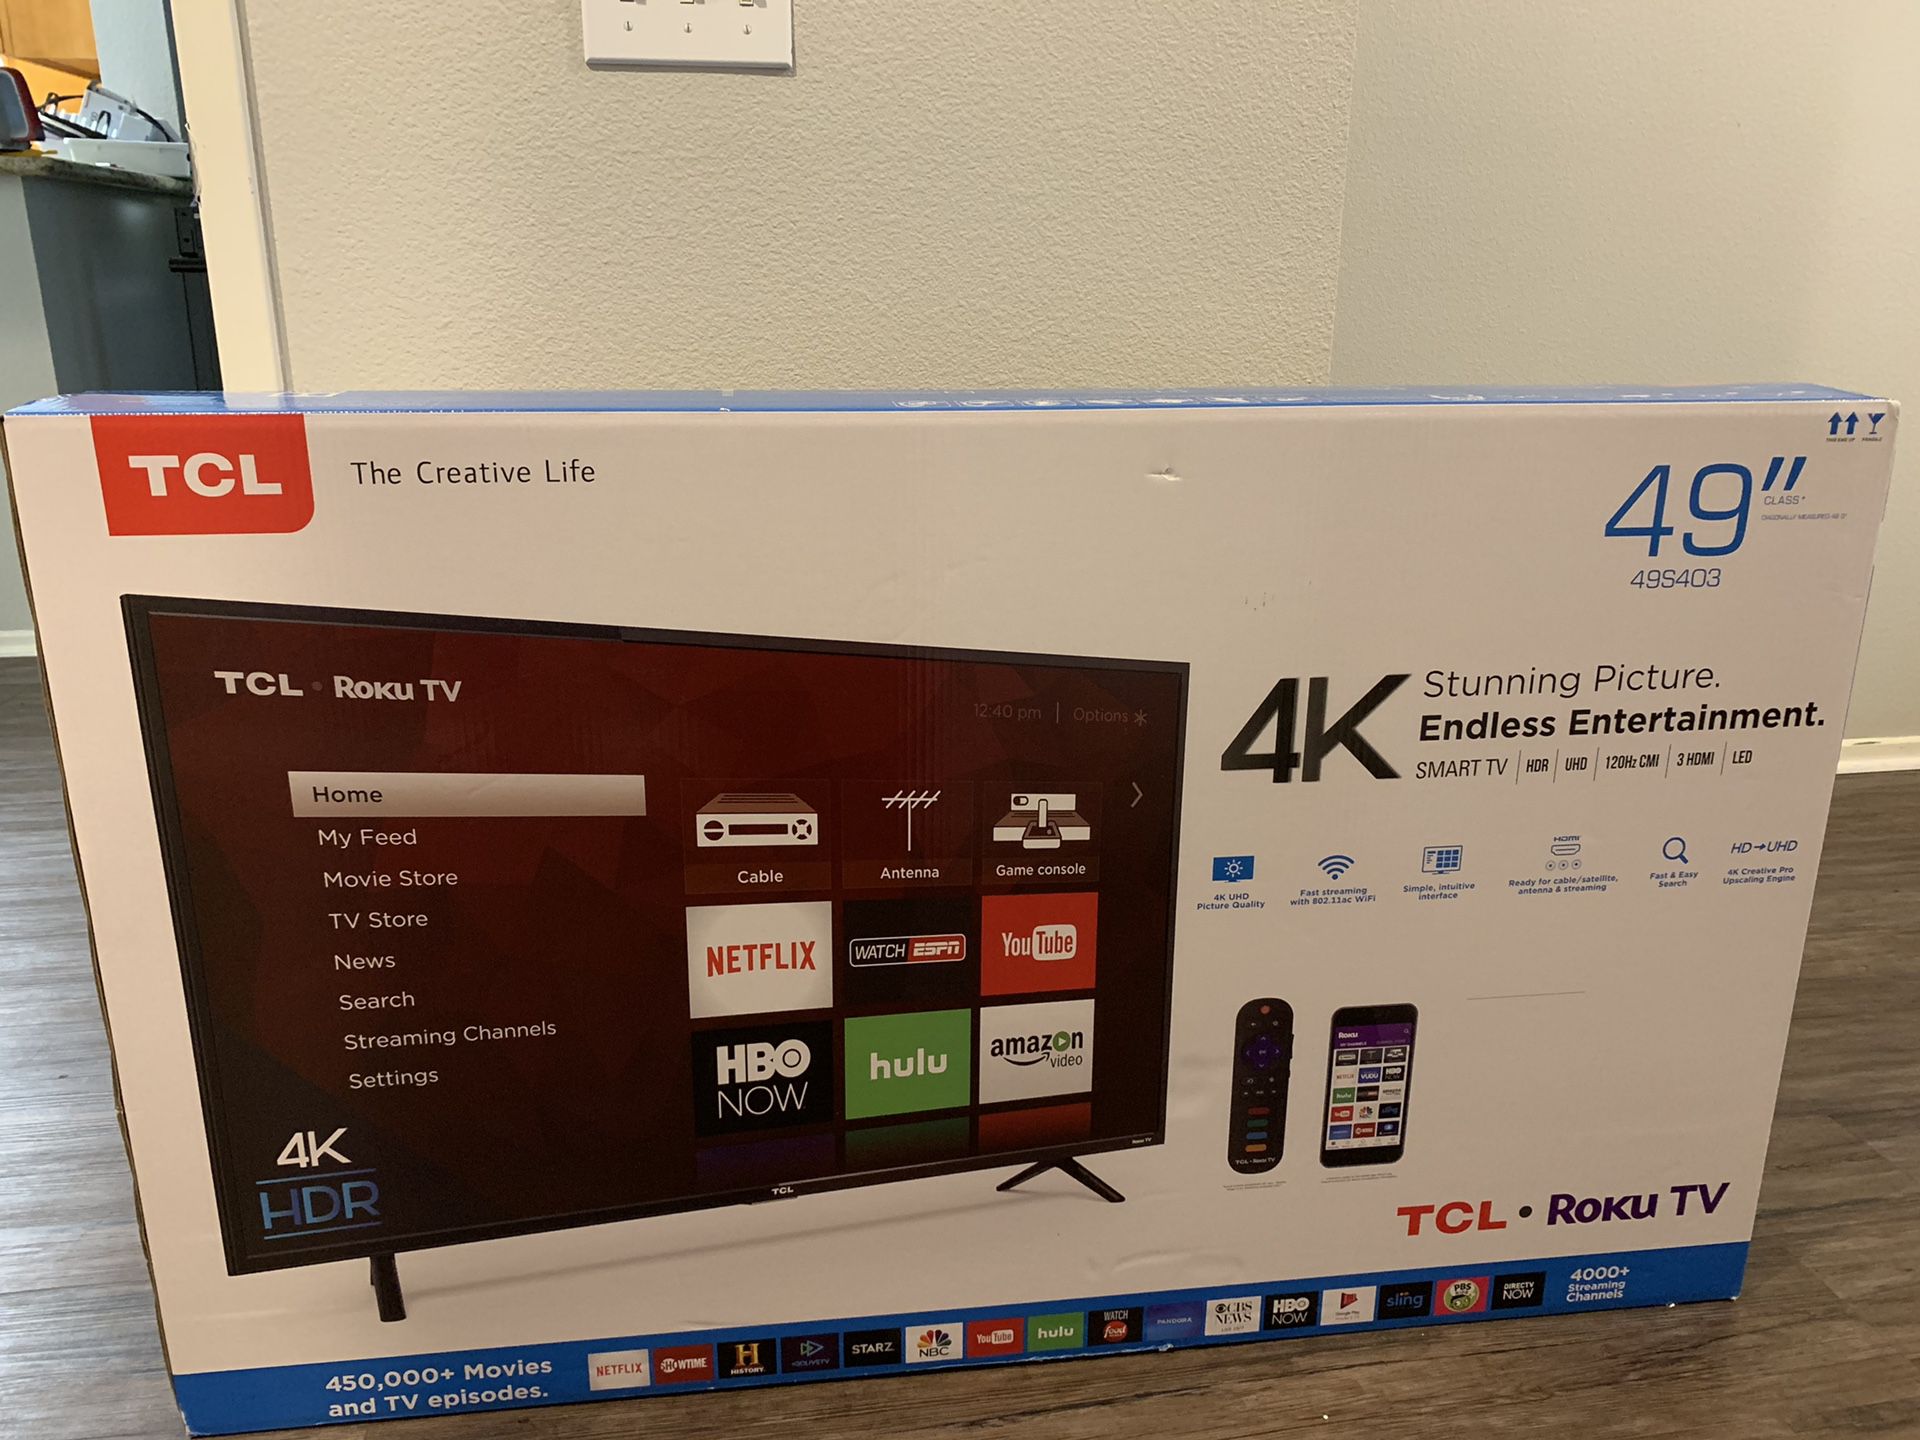 TCL ROKU TV 49” 4K Stunning picture